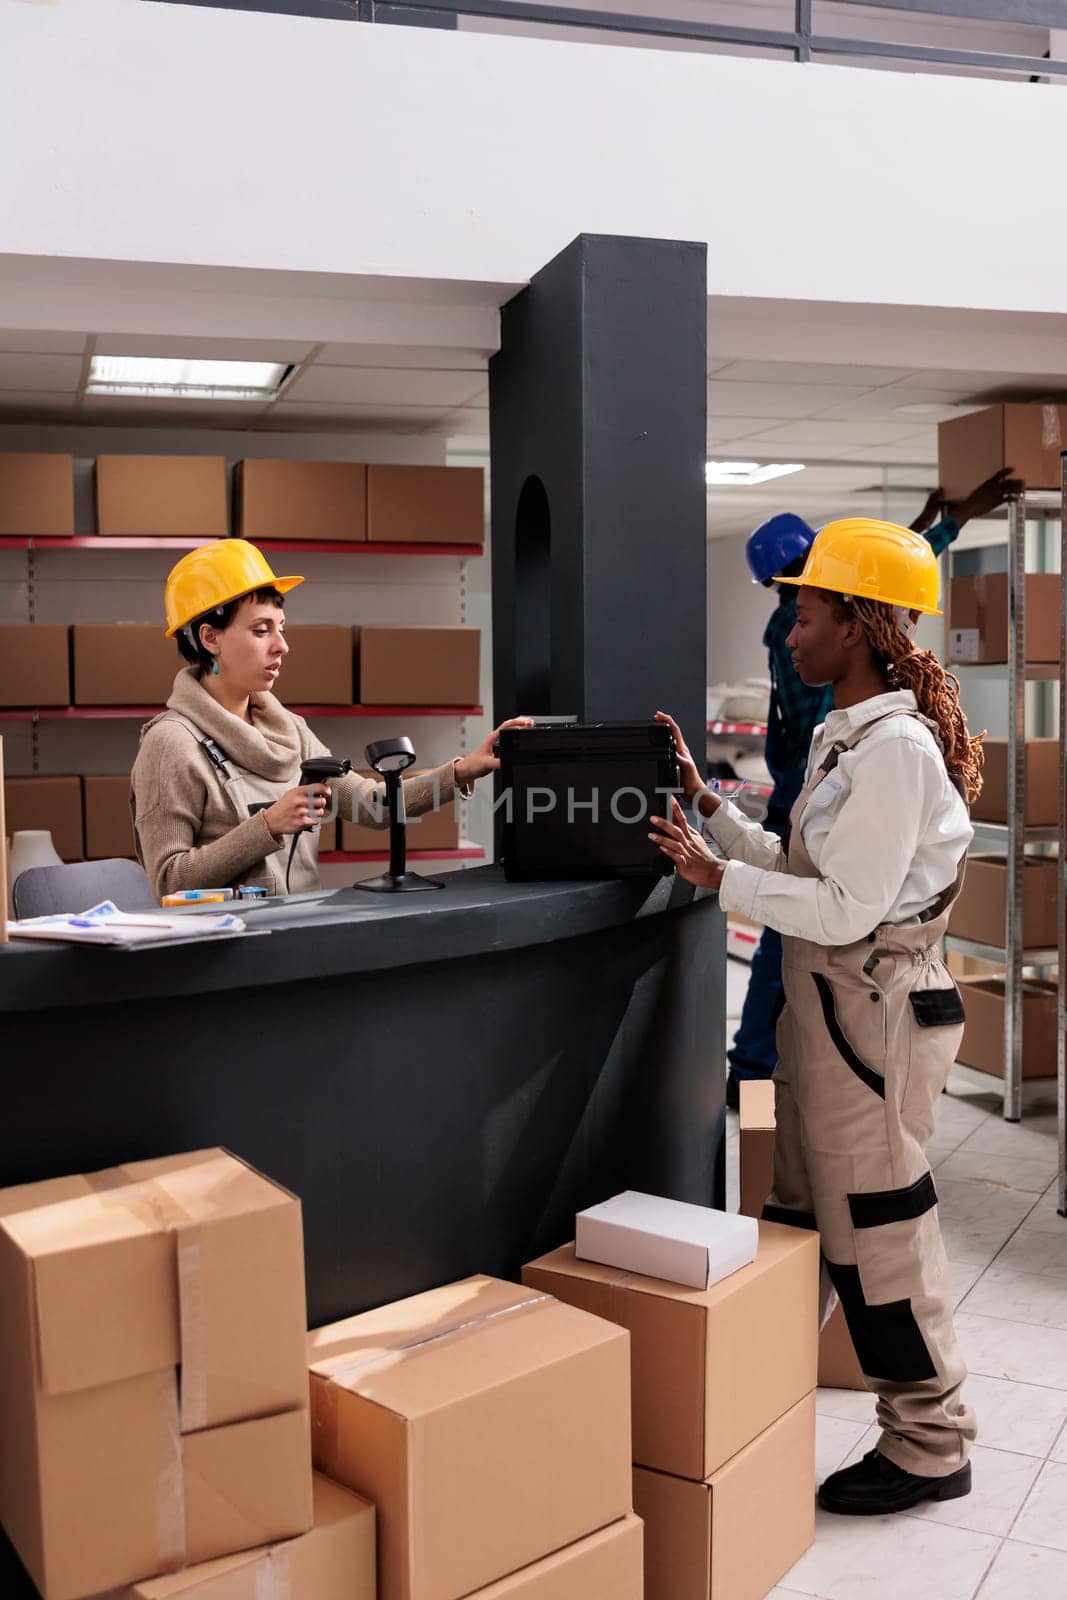 Warehouse manager scanning case at counter desk, doing inventory by DCStudio